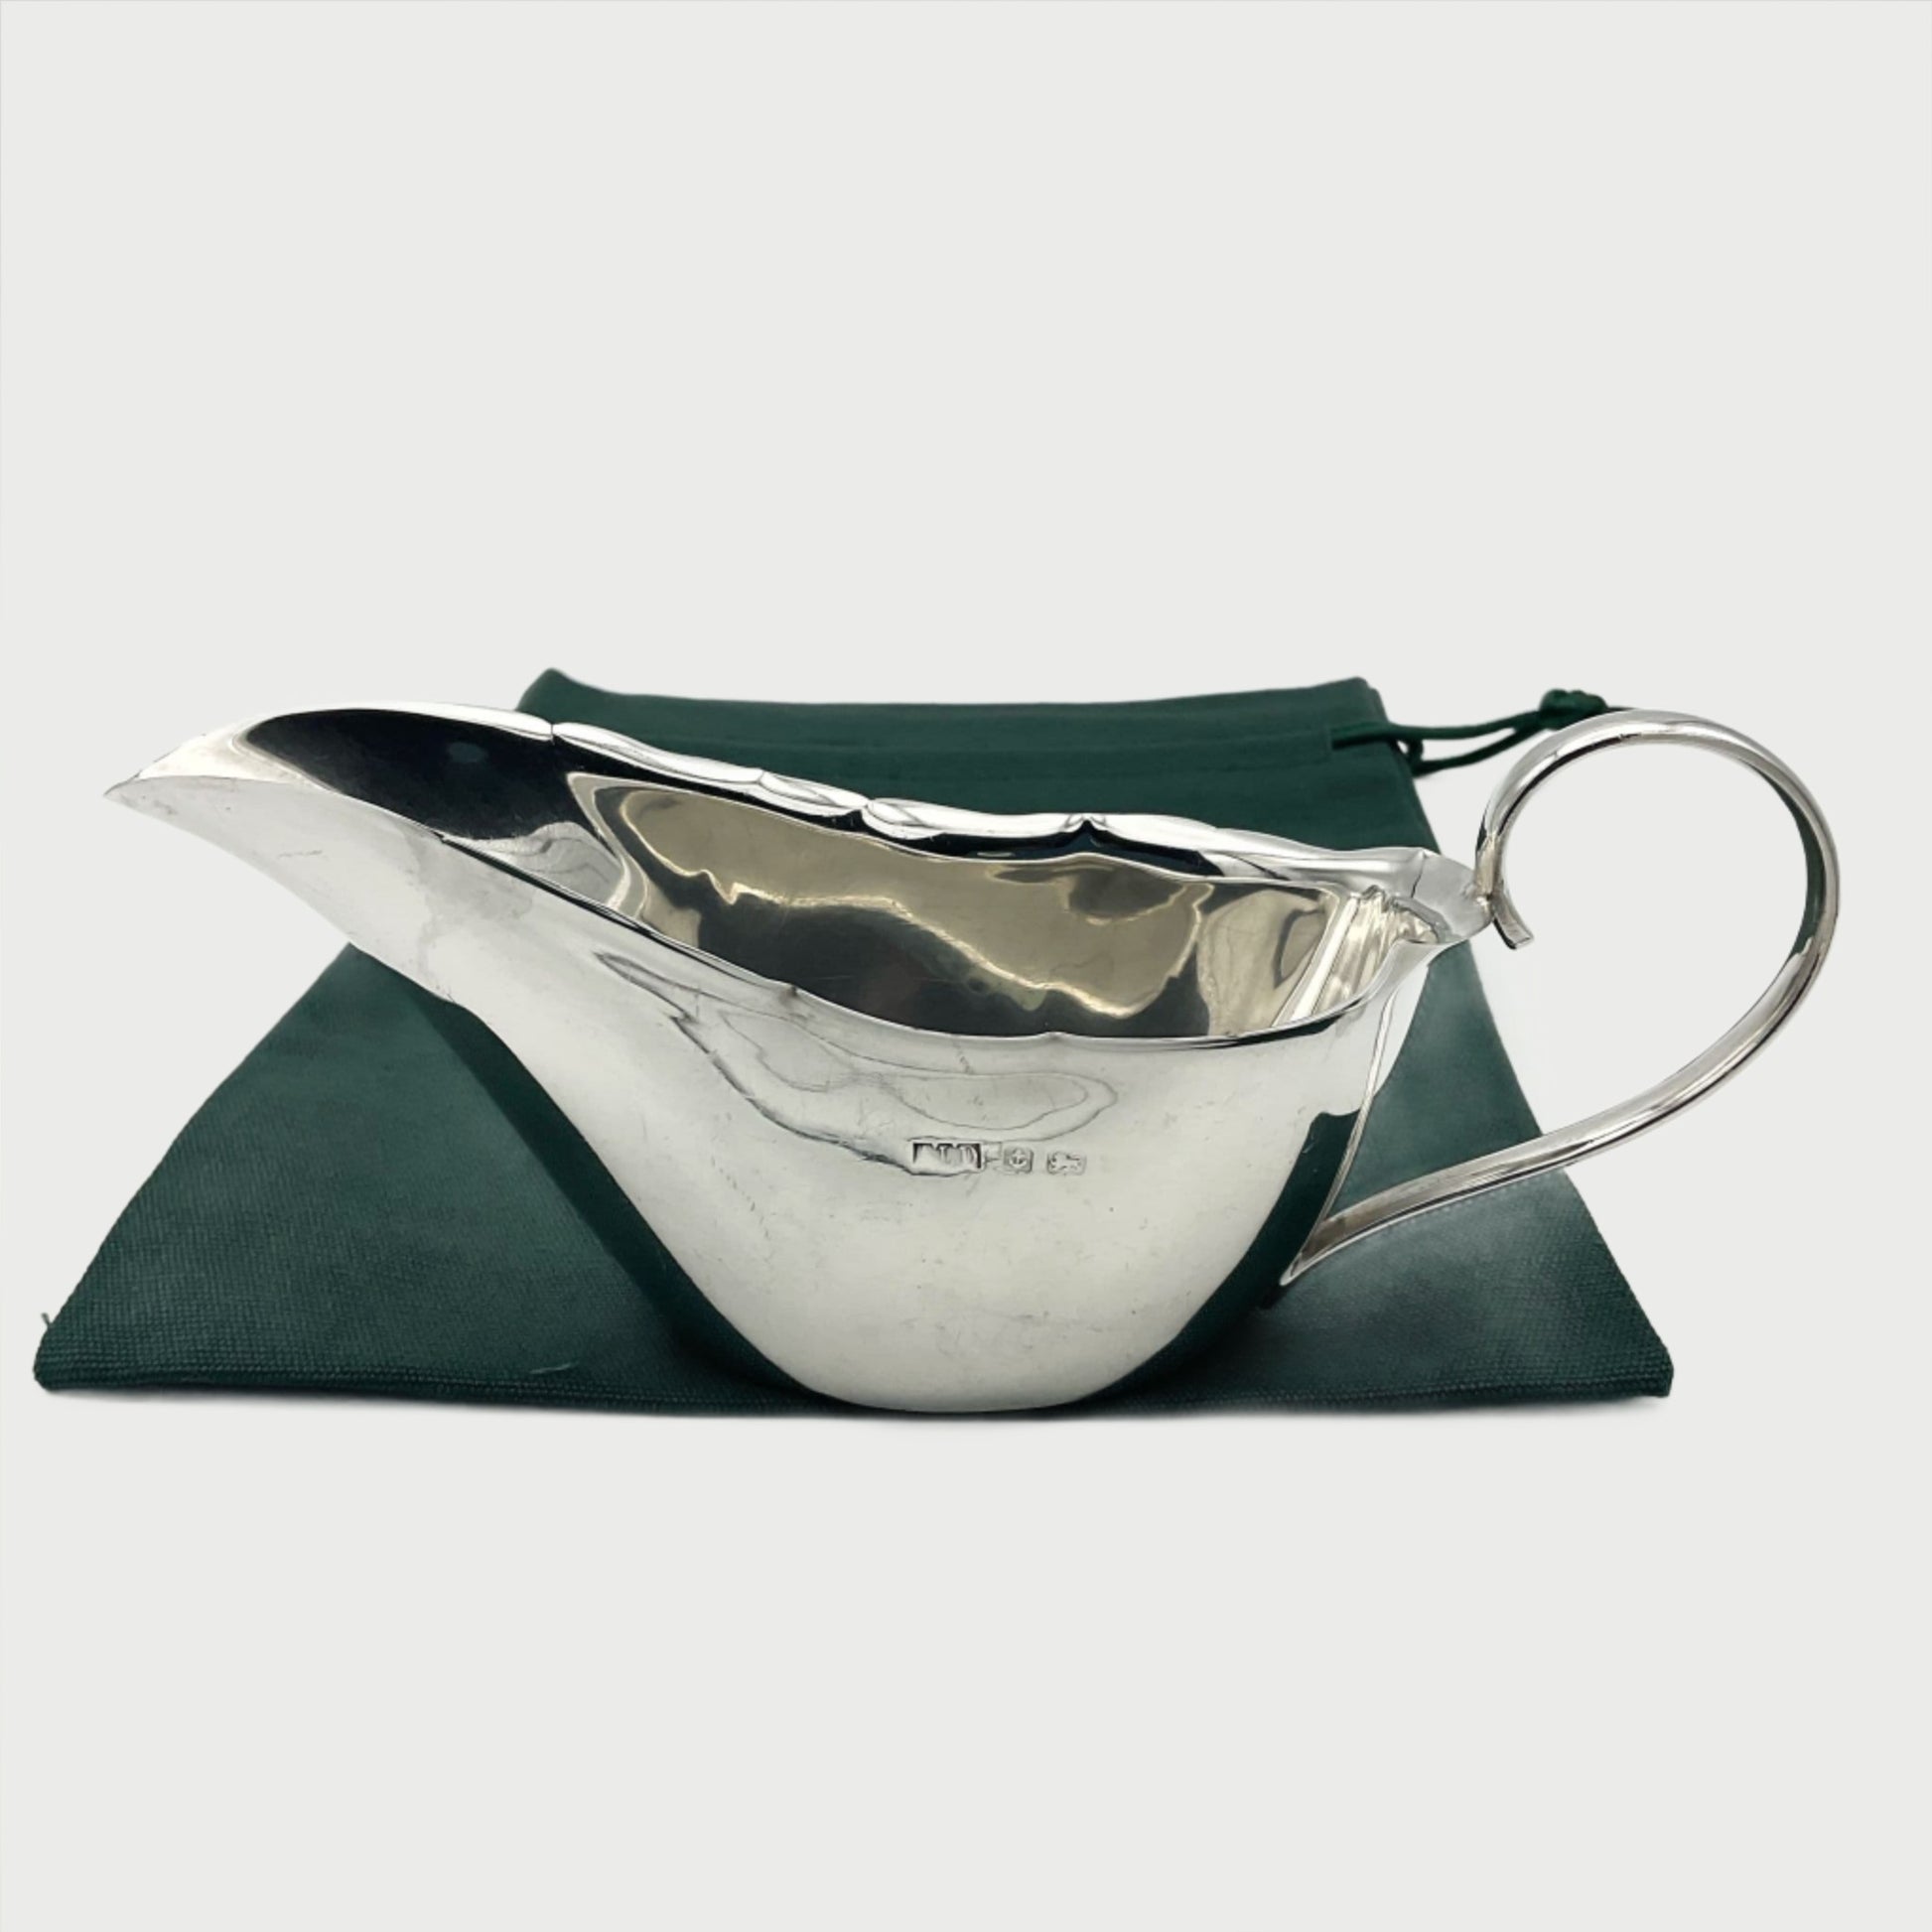 Shiny Silver sauce boat sitting on a green cotton bag. The sauce boat has a loop handle , crimped edges and Silver hallmarks on one side.